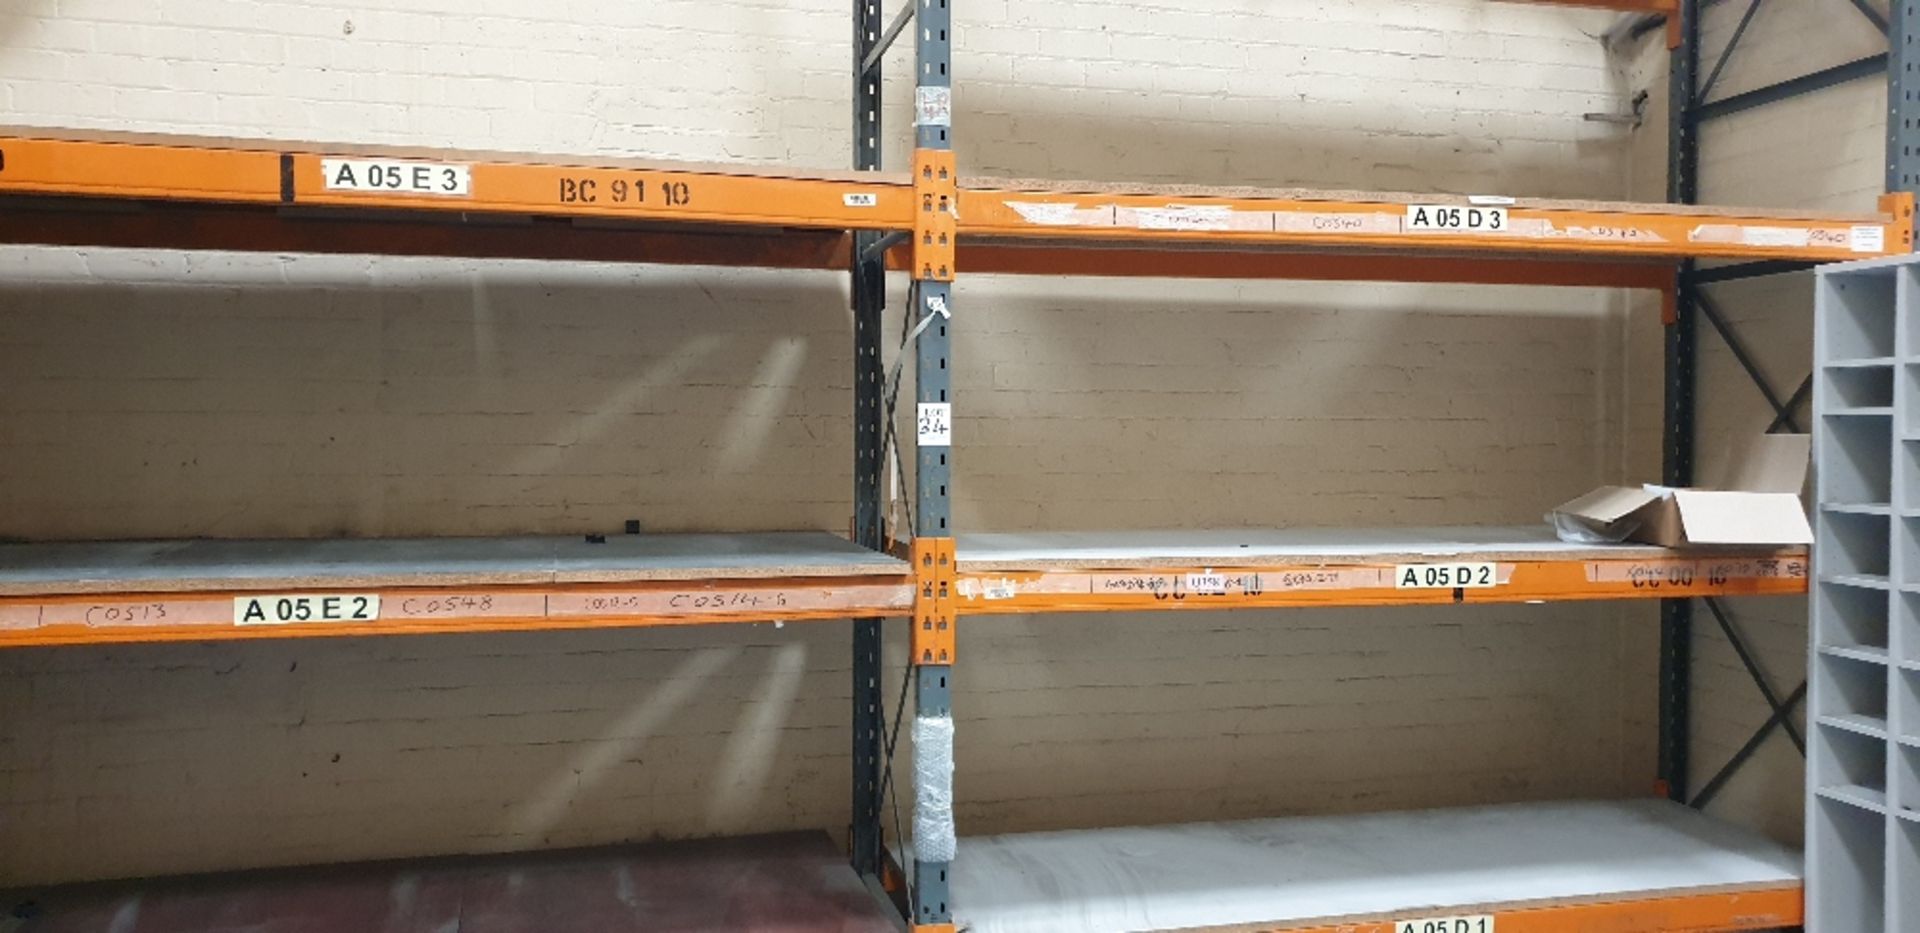 2 - bays of heavy duty pallet racking with 25mm chipboard shelving